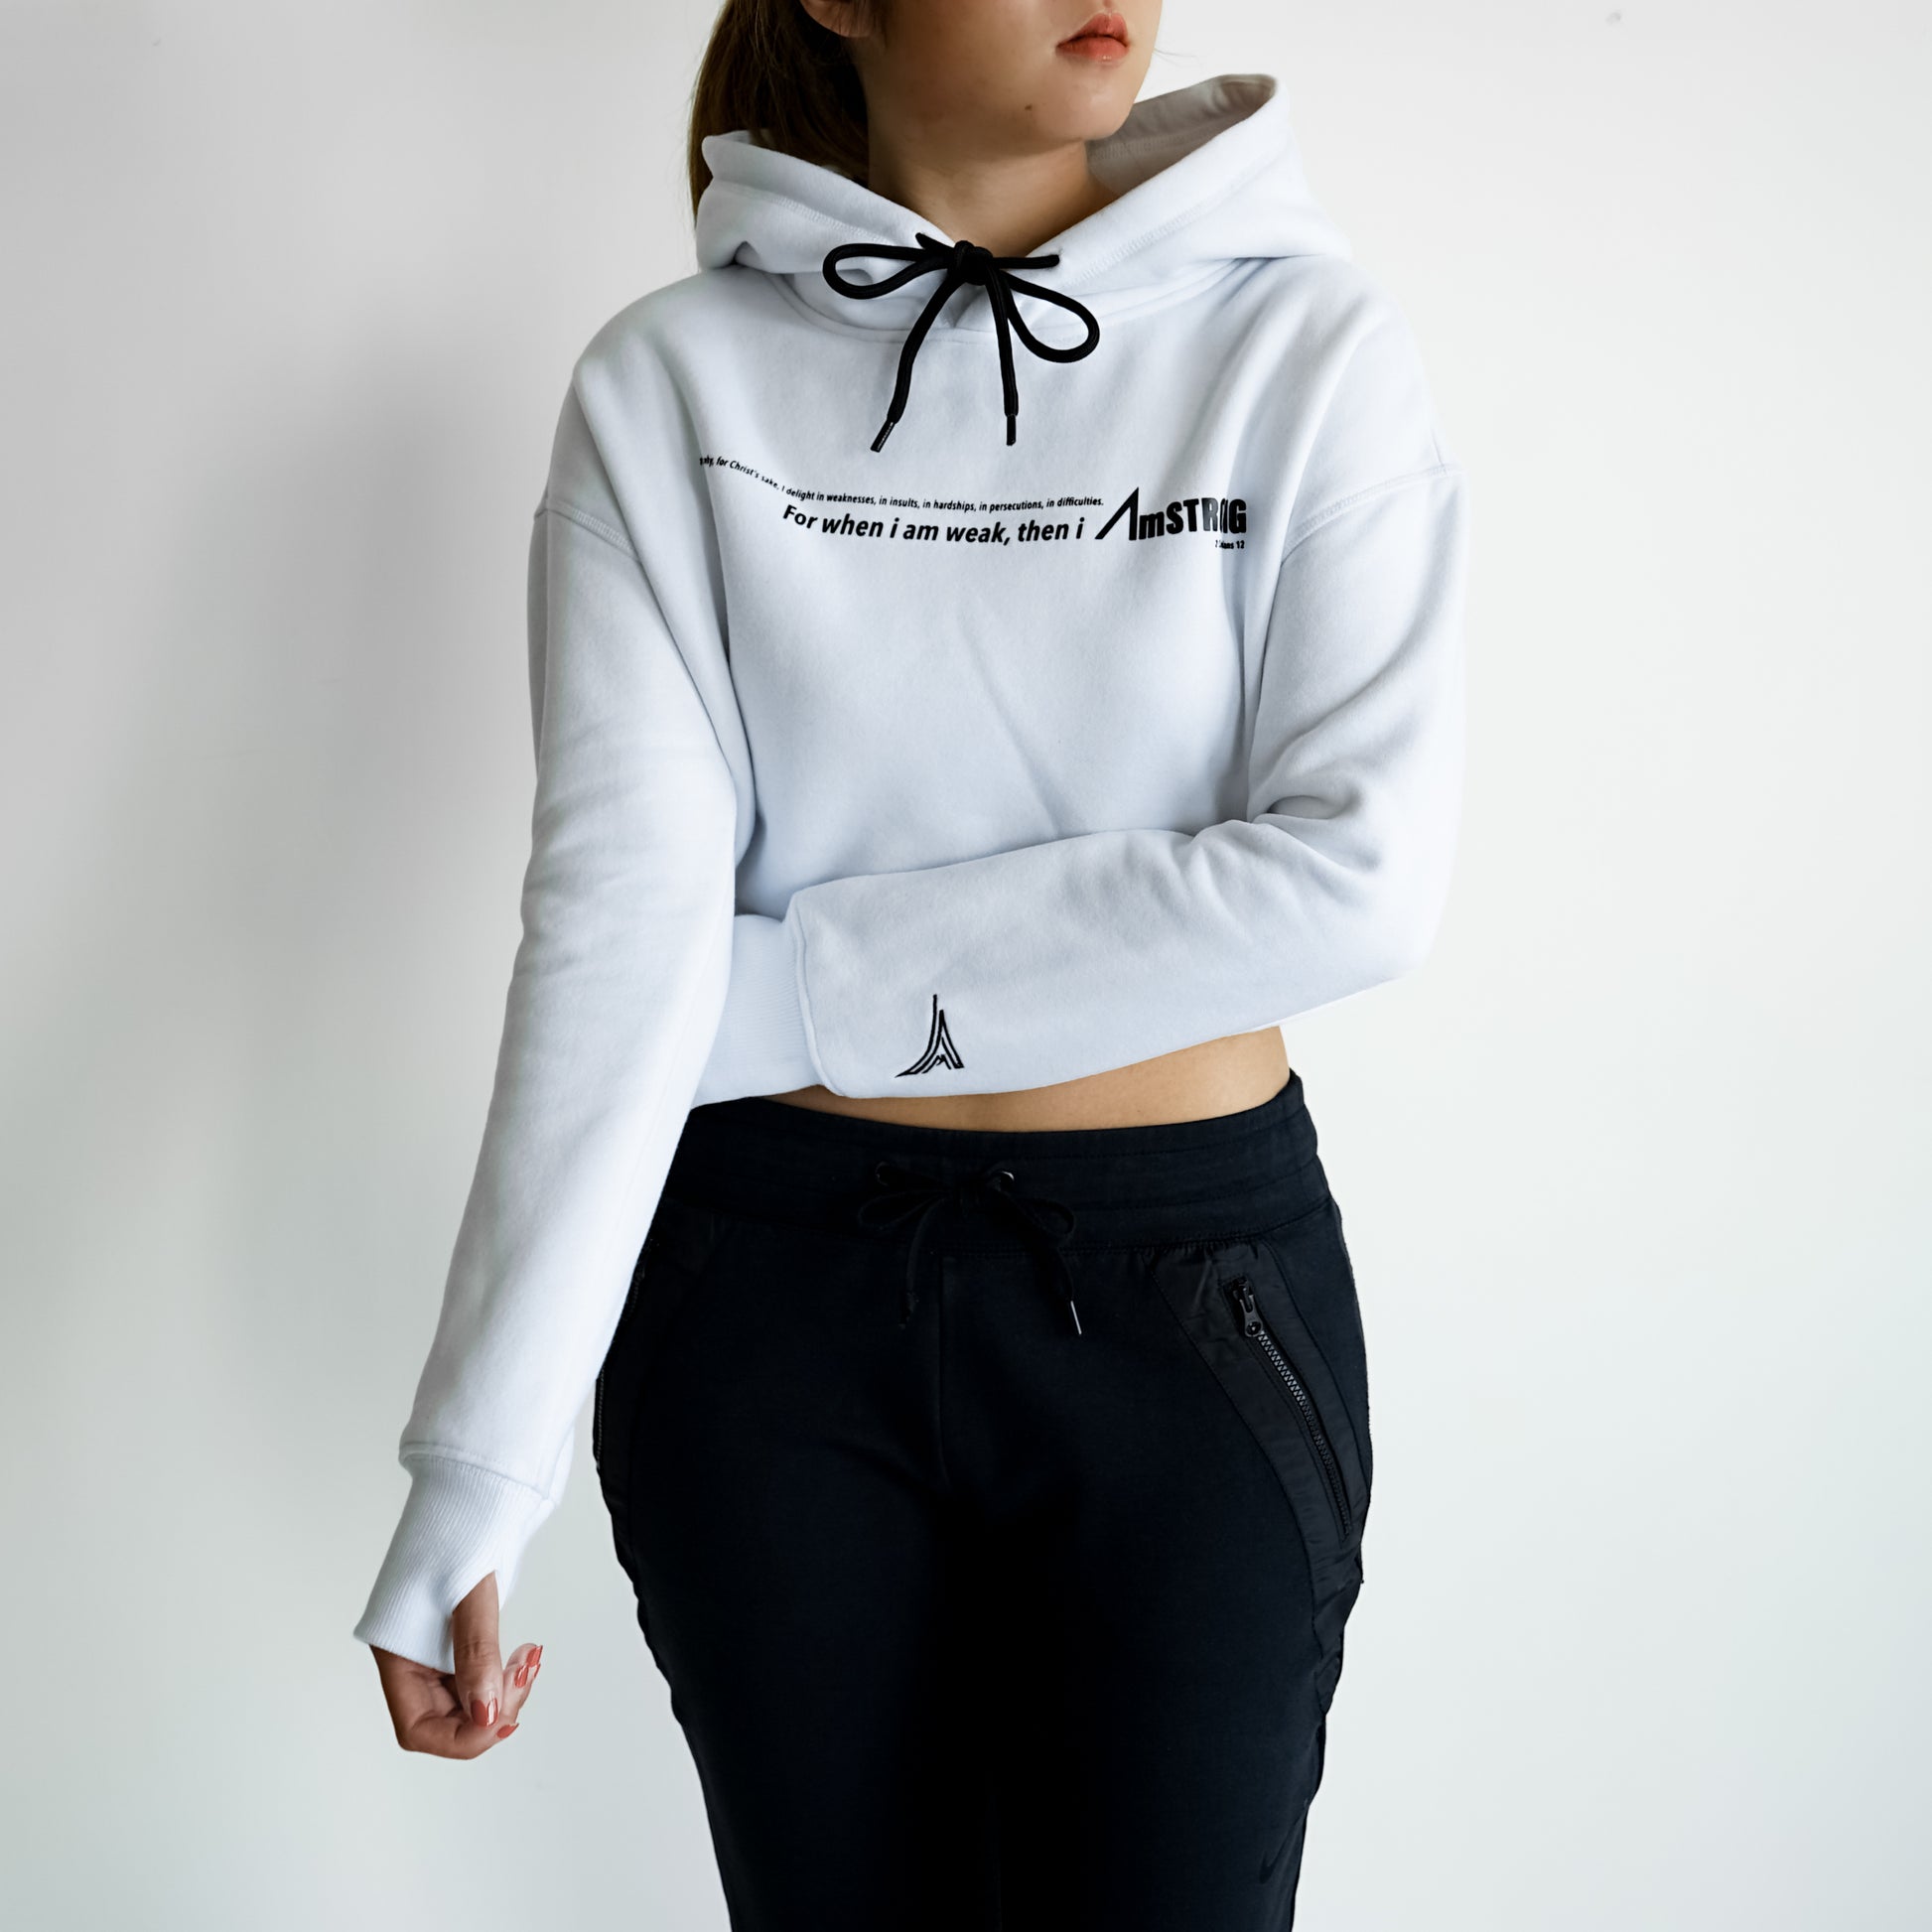 woman in white cropped hoodie and black pants